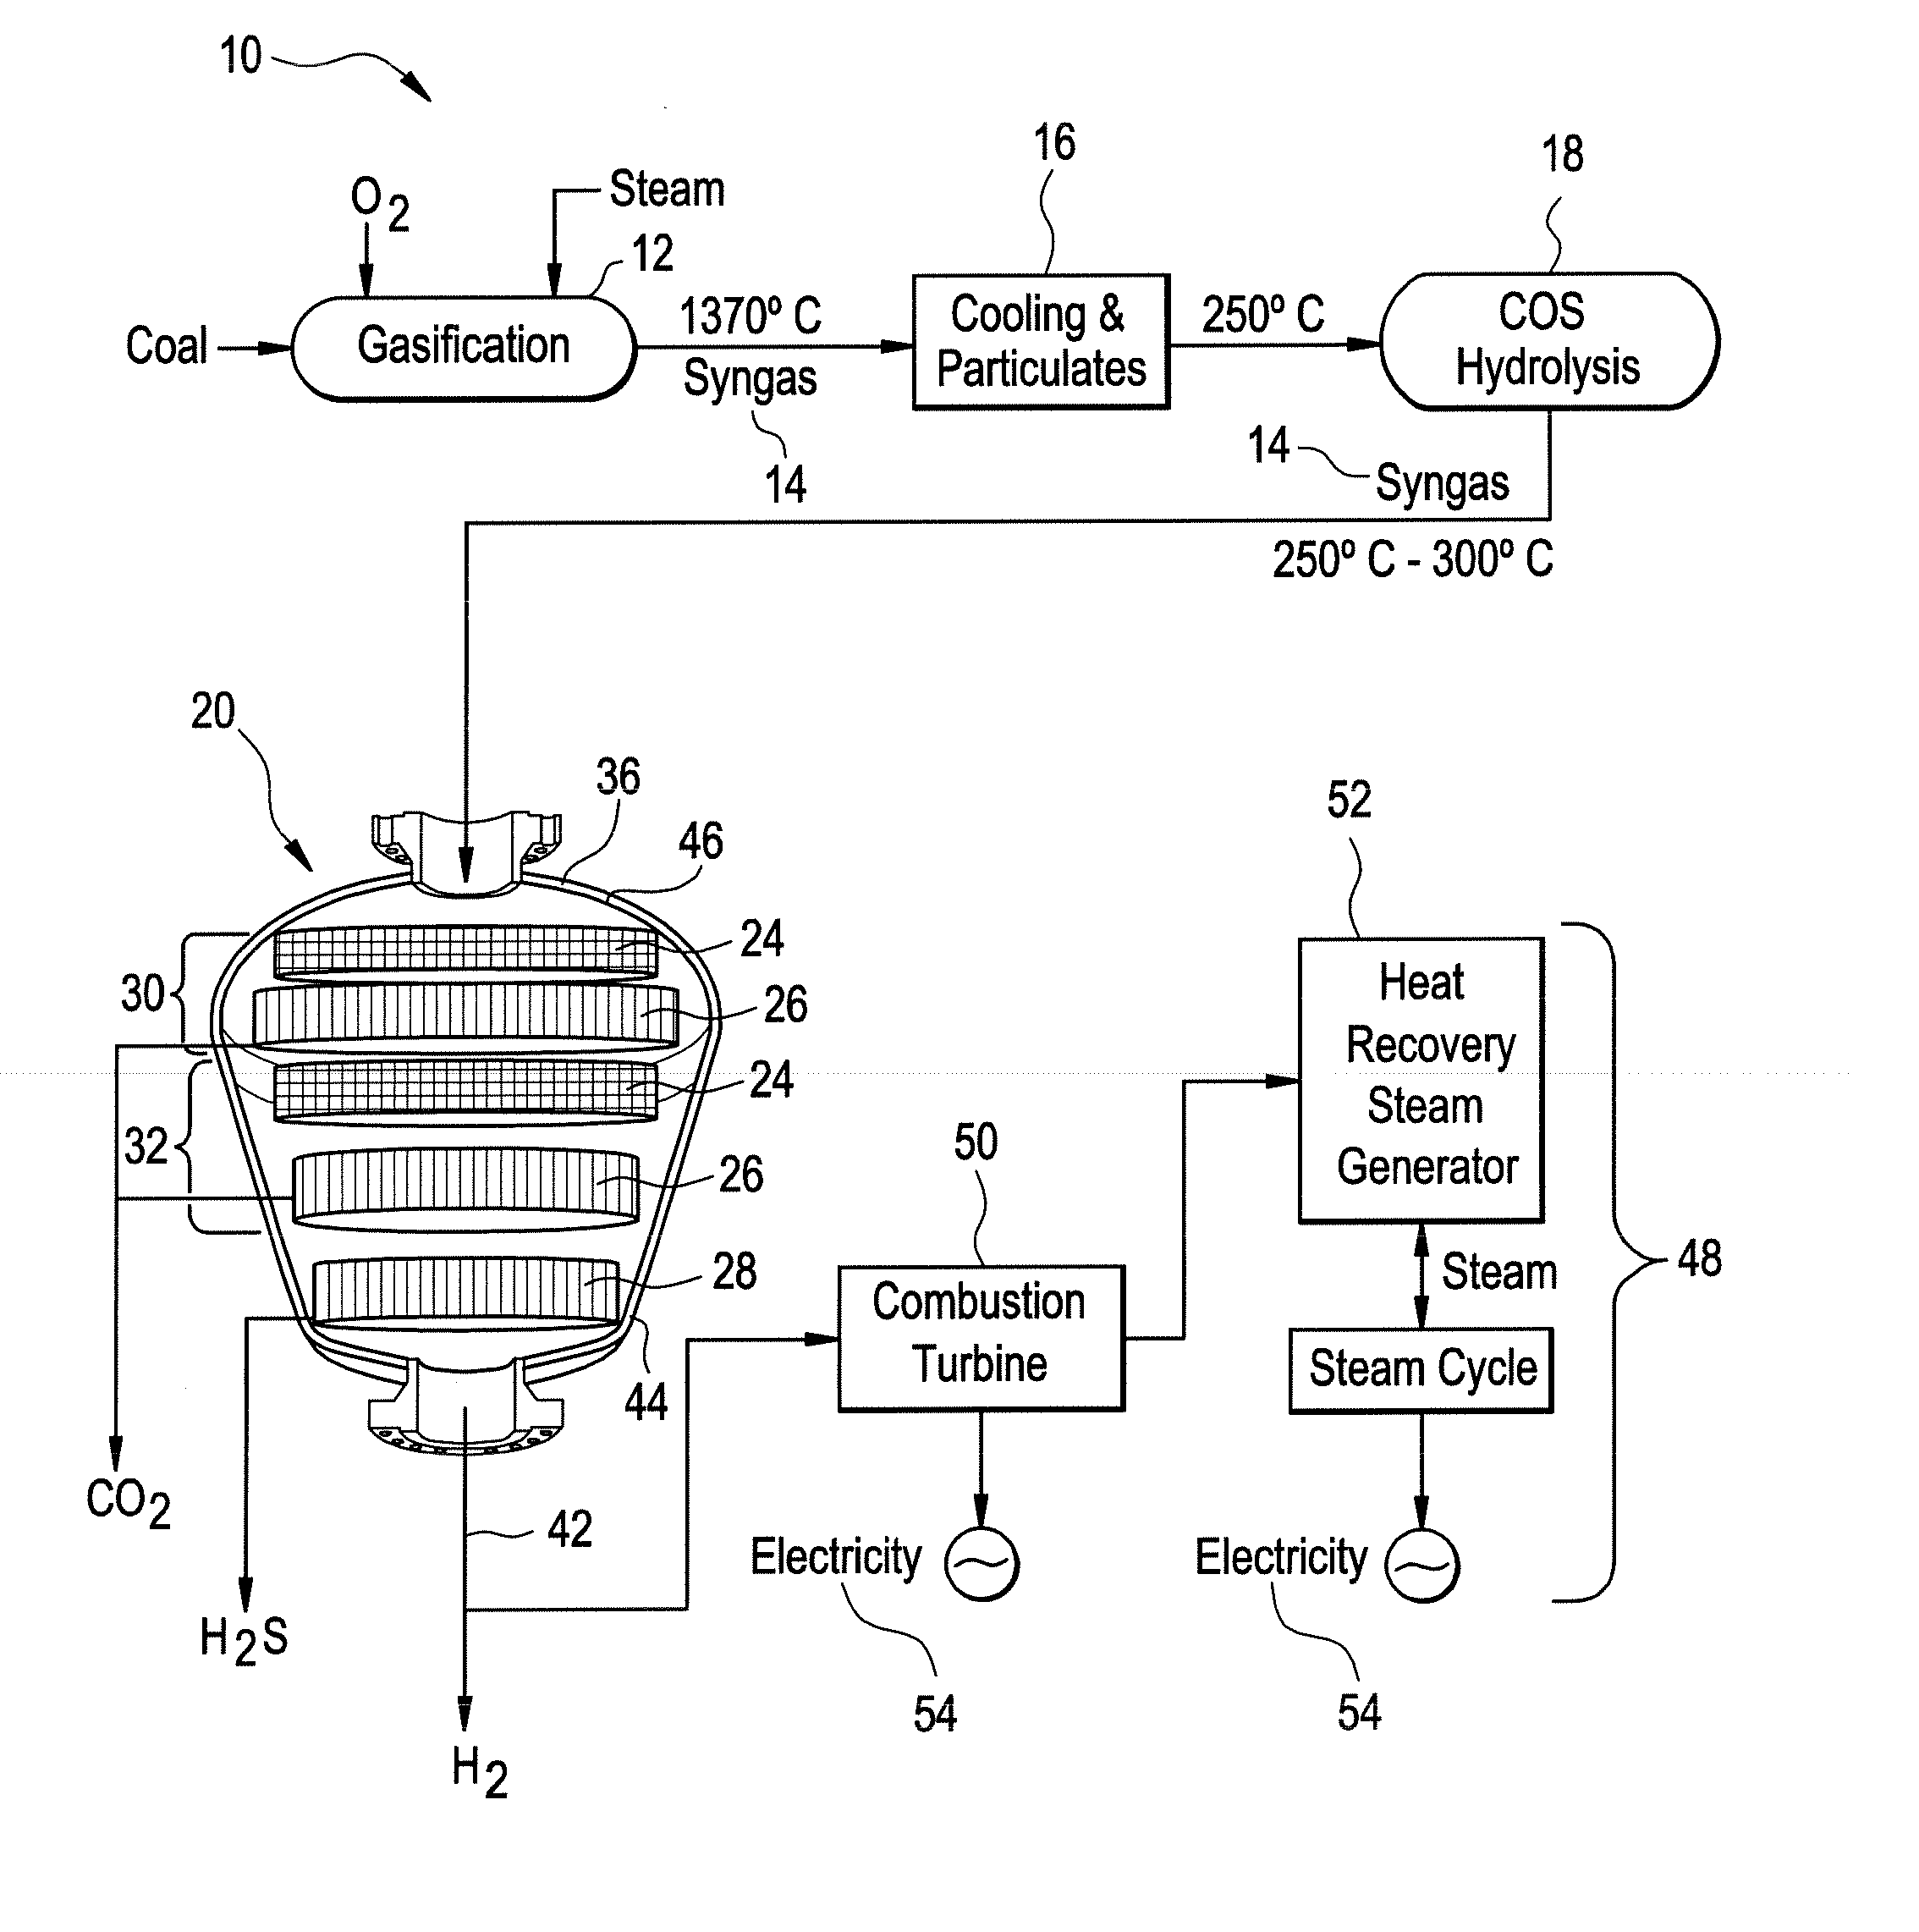 Methods and Apparatus for Carbon Dioxide Removal from a Fluid Stream